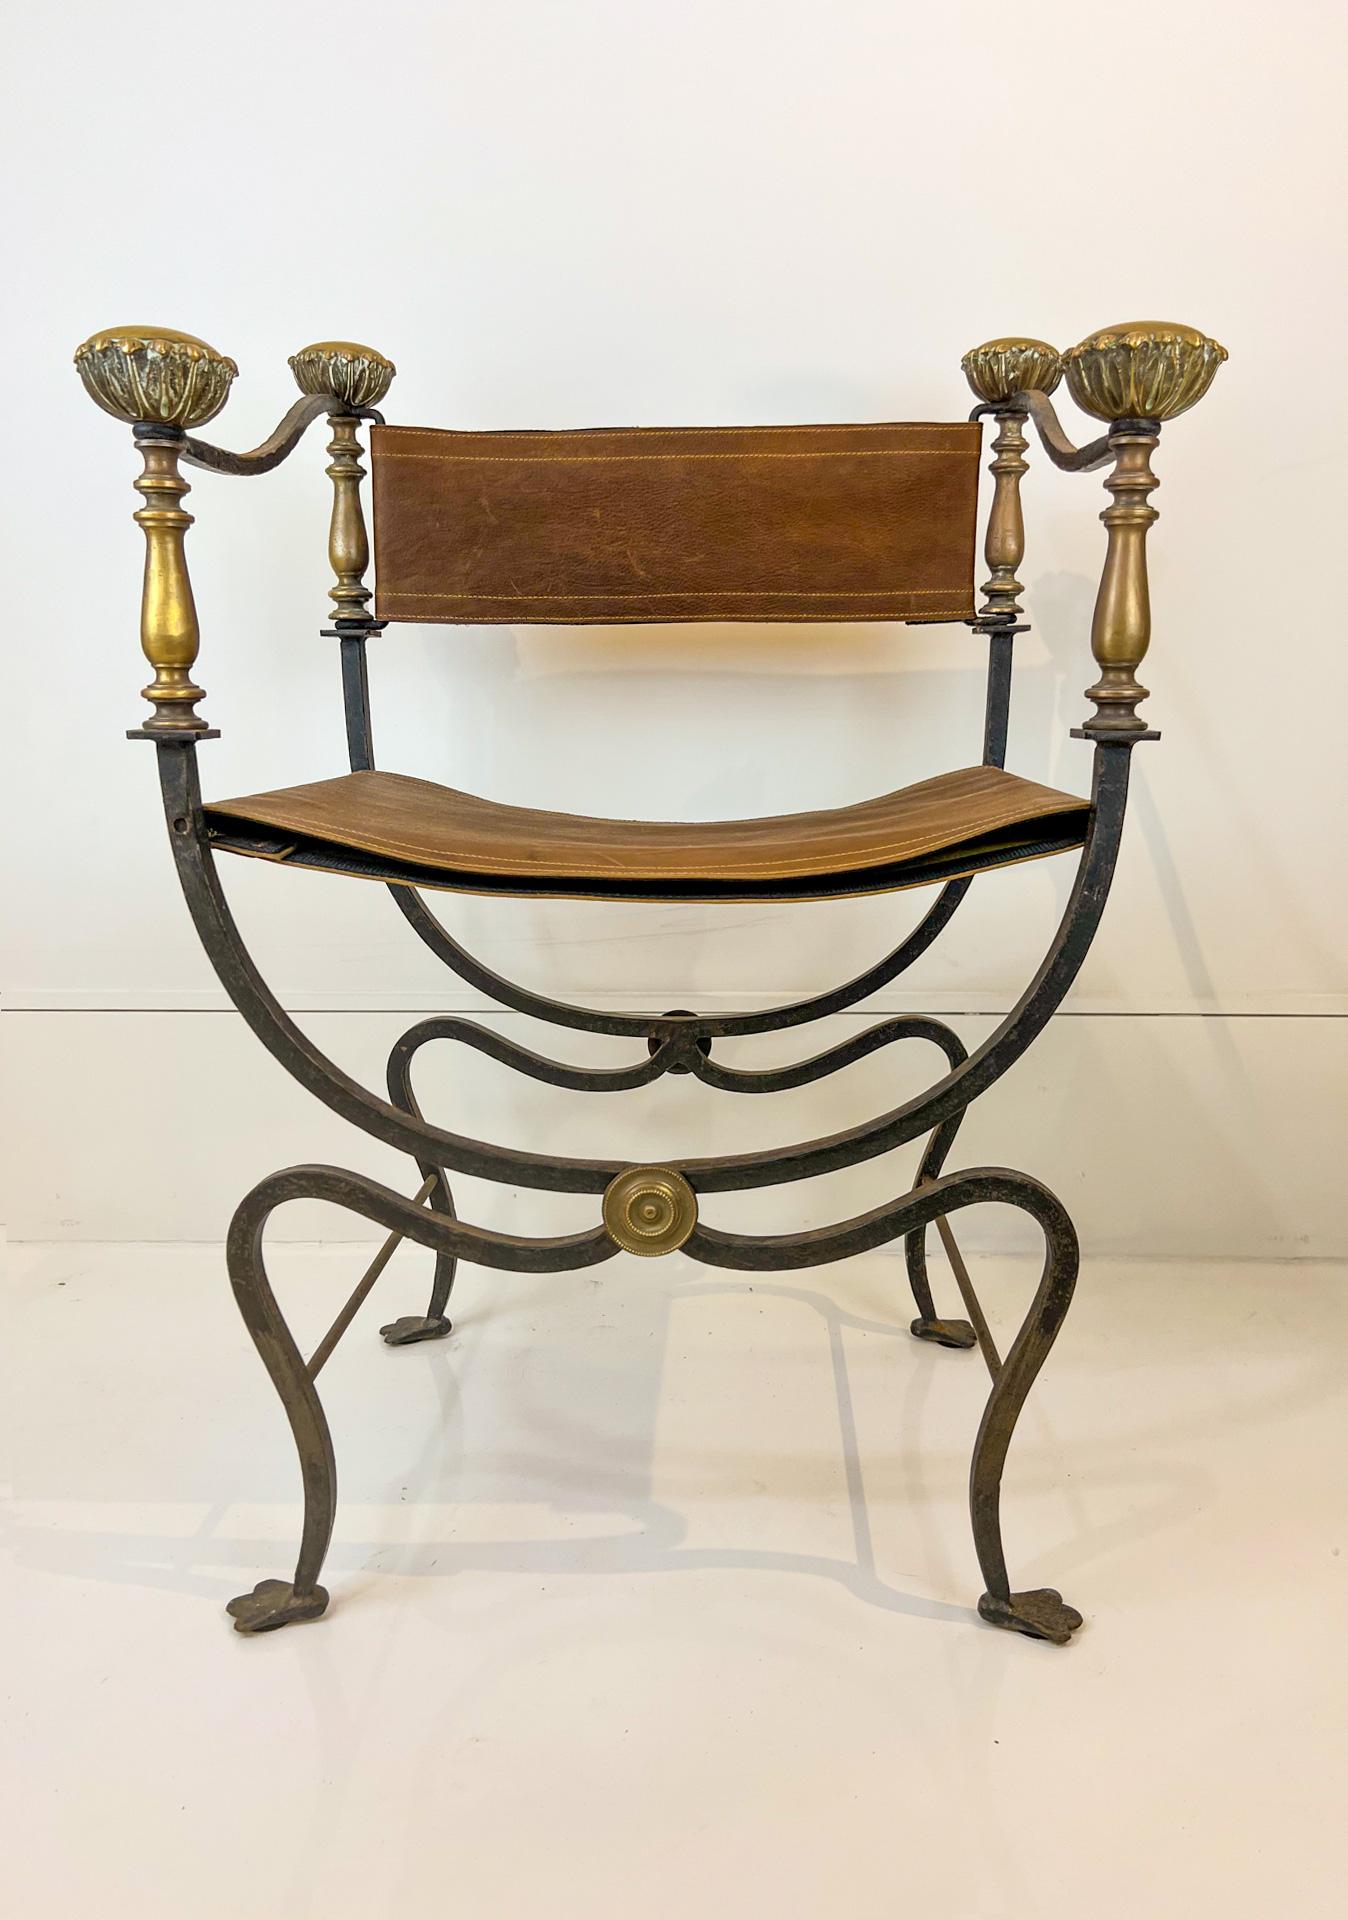 This very popular type of chair is perfect for a pull up or at a desk. The appeal is it's geometry: Arched legs and rectangular seat and back with a flourish of brass knobs on the arms.